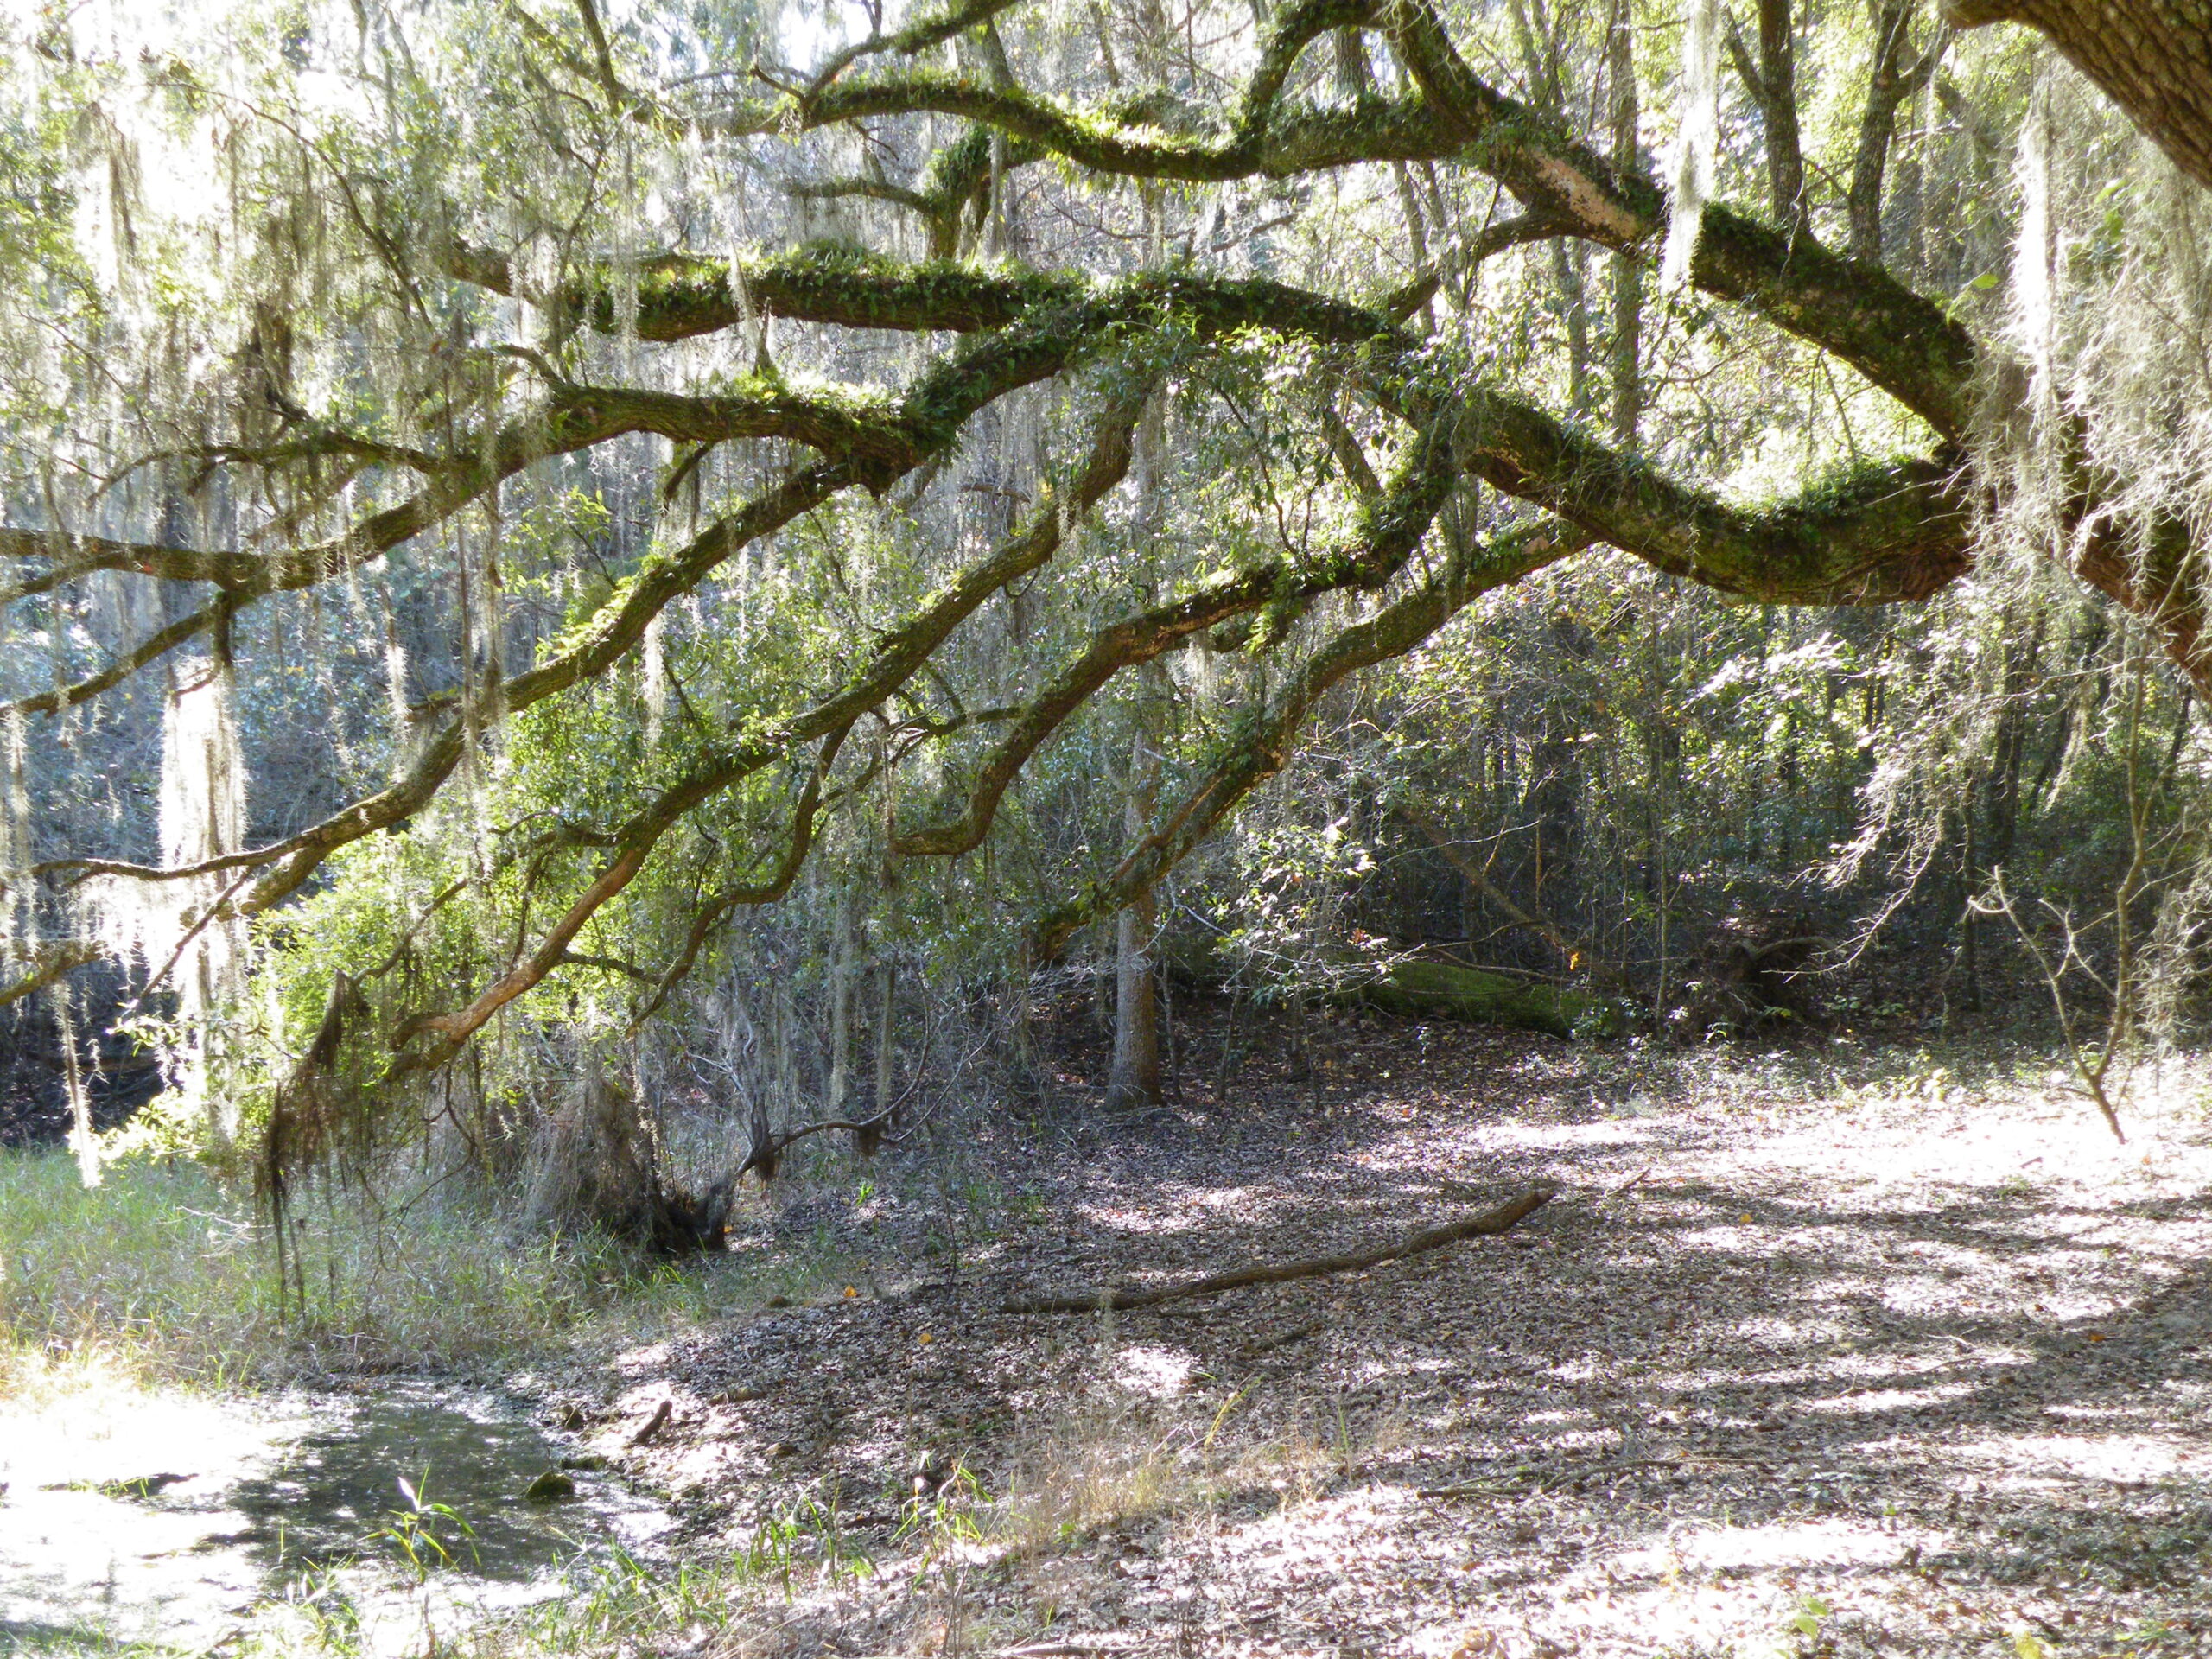 Photo is decorative and taken by a Tallahassee Realtor. Photo shows a dirt trail under a sprawling oak